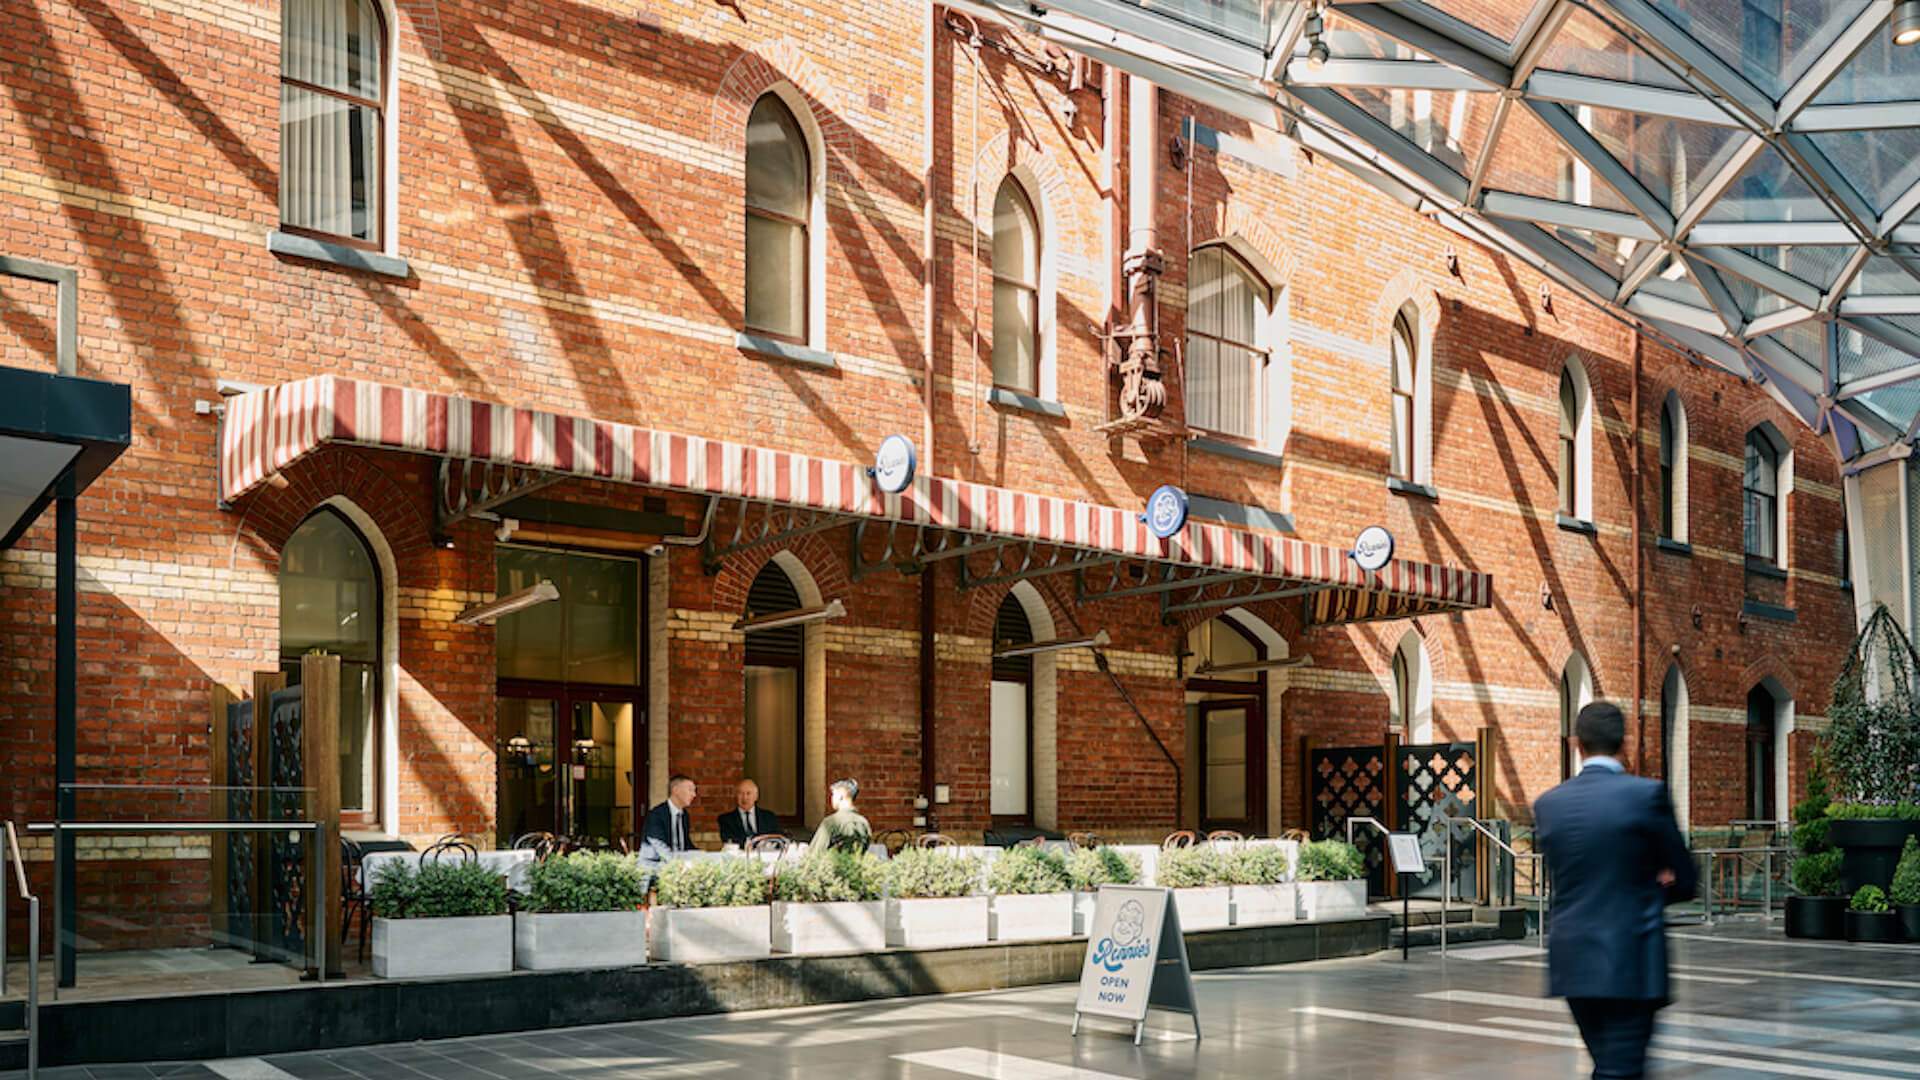 Outdoor dining at Ronnie's - Italian restaurant in Melbourne CBD